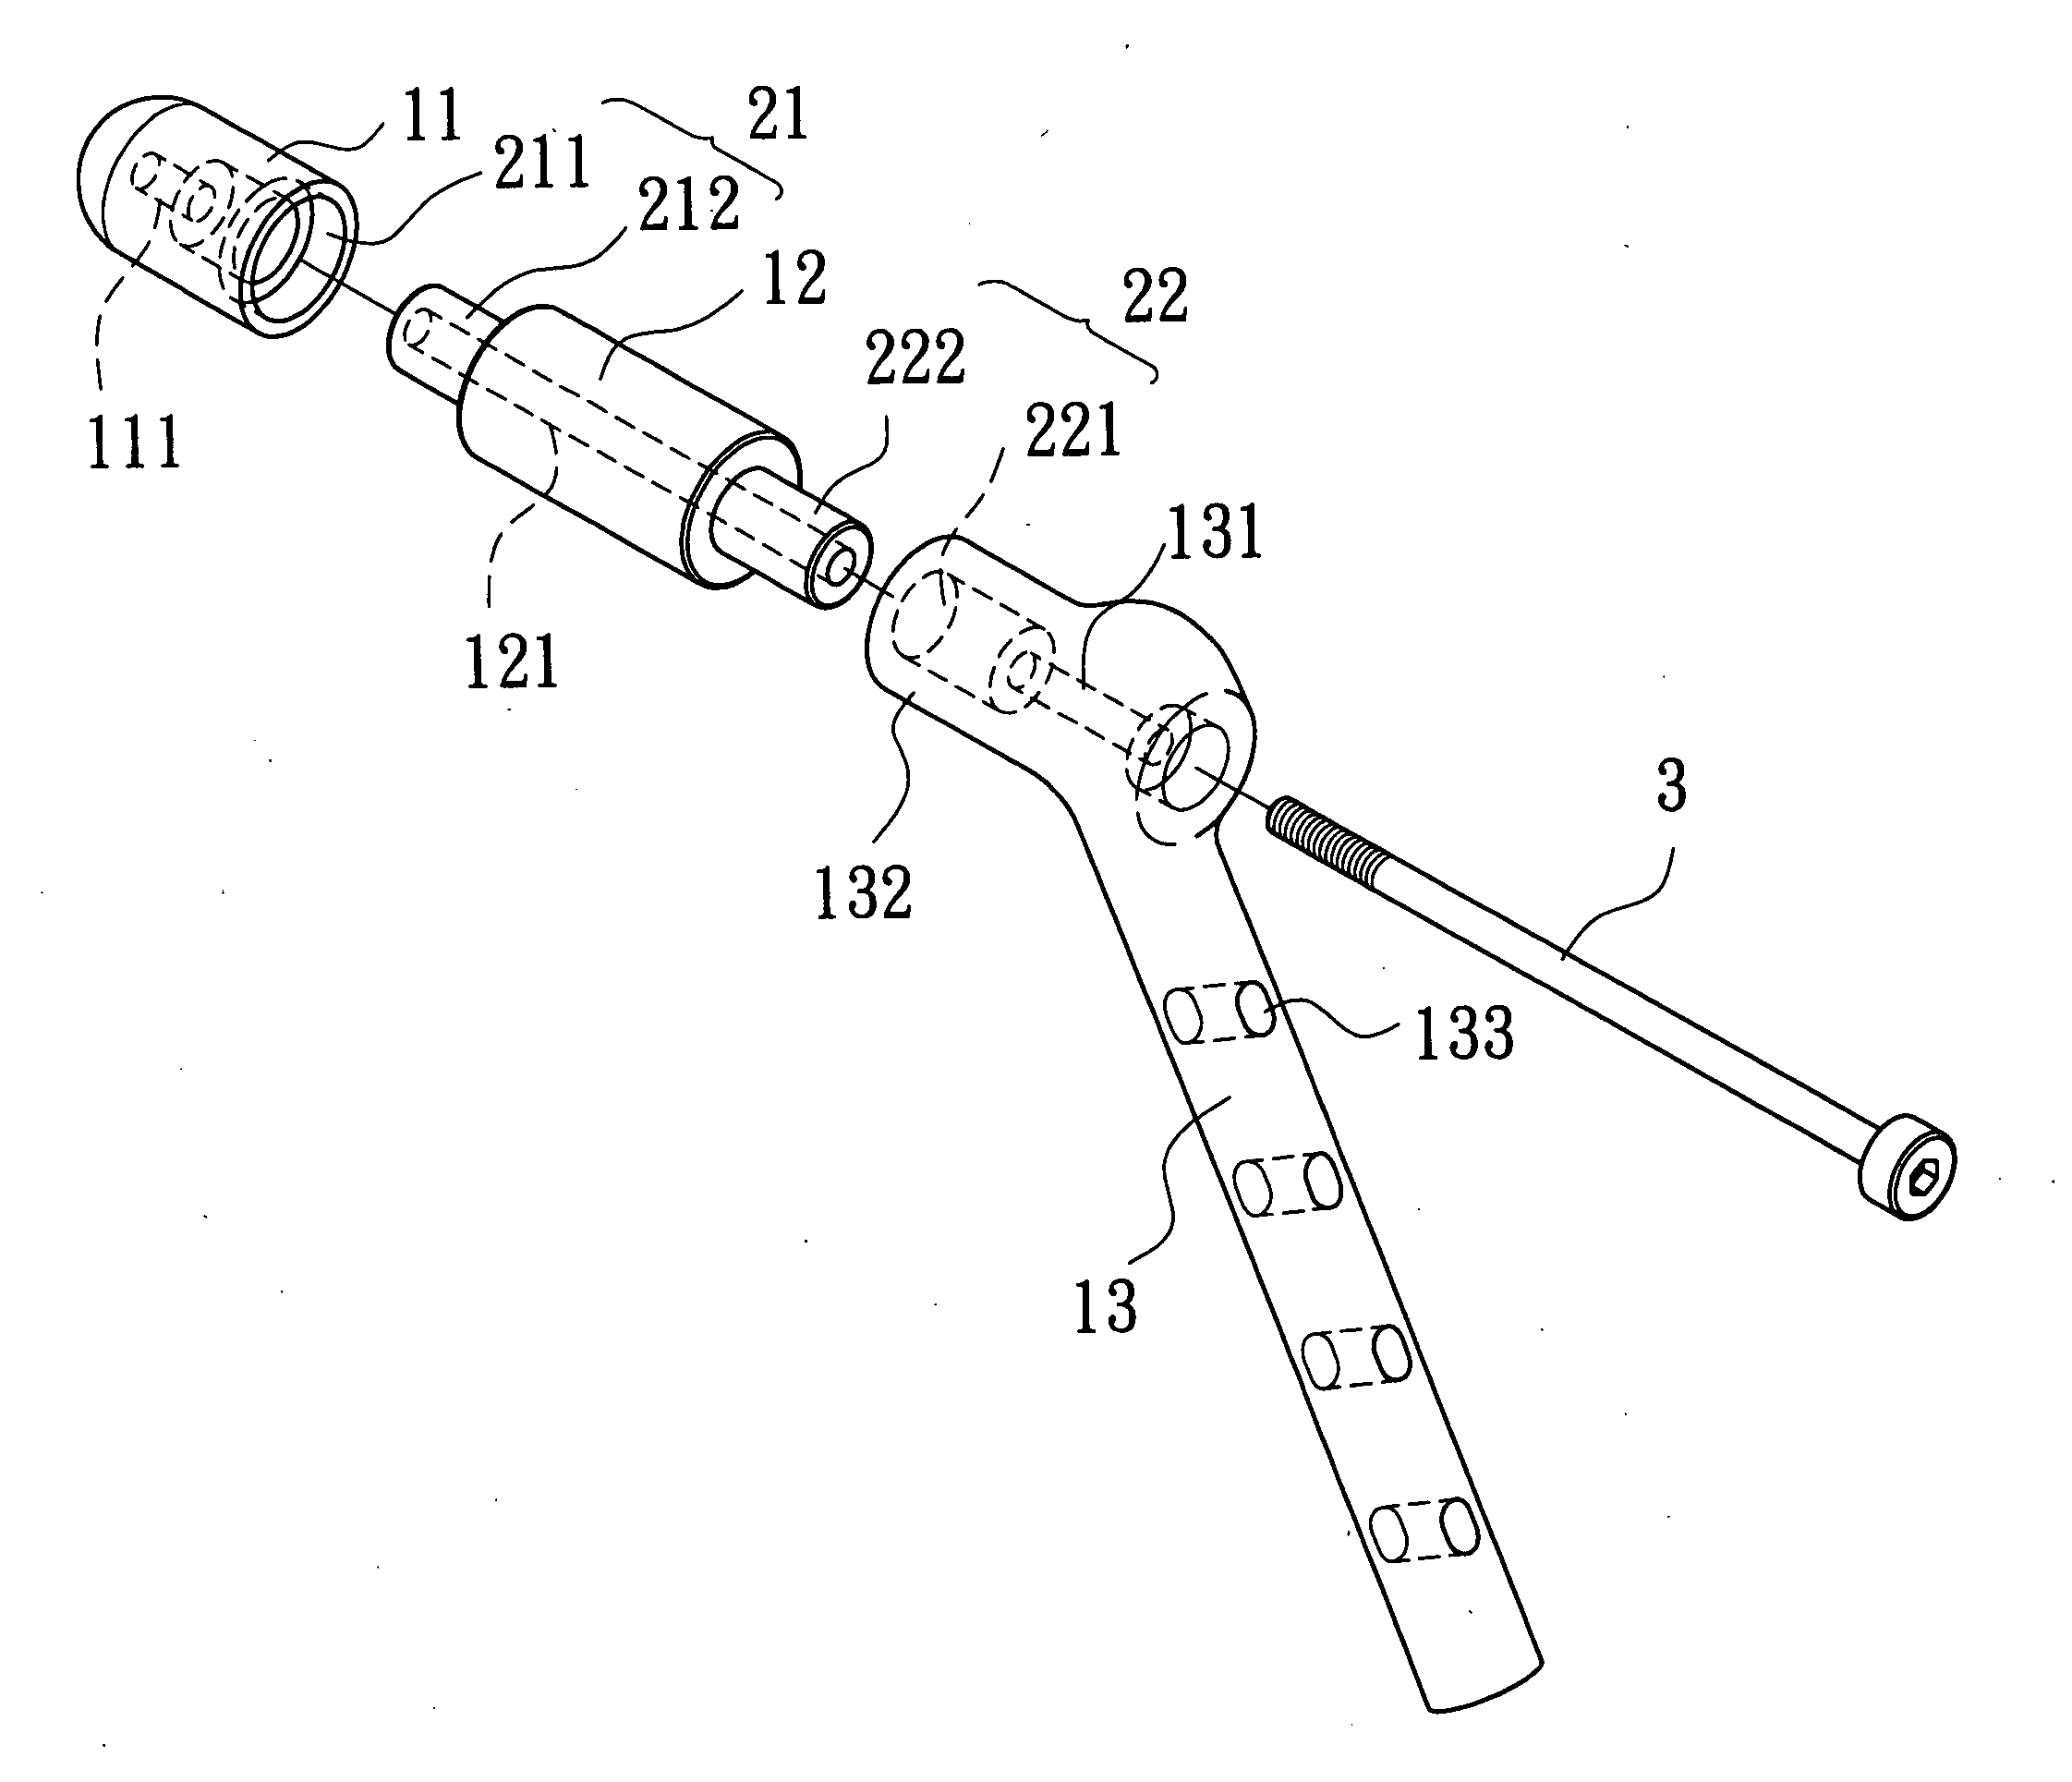 Femoral head and neck strengthening device